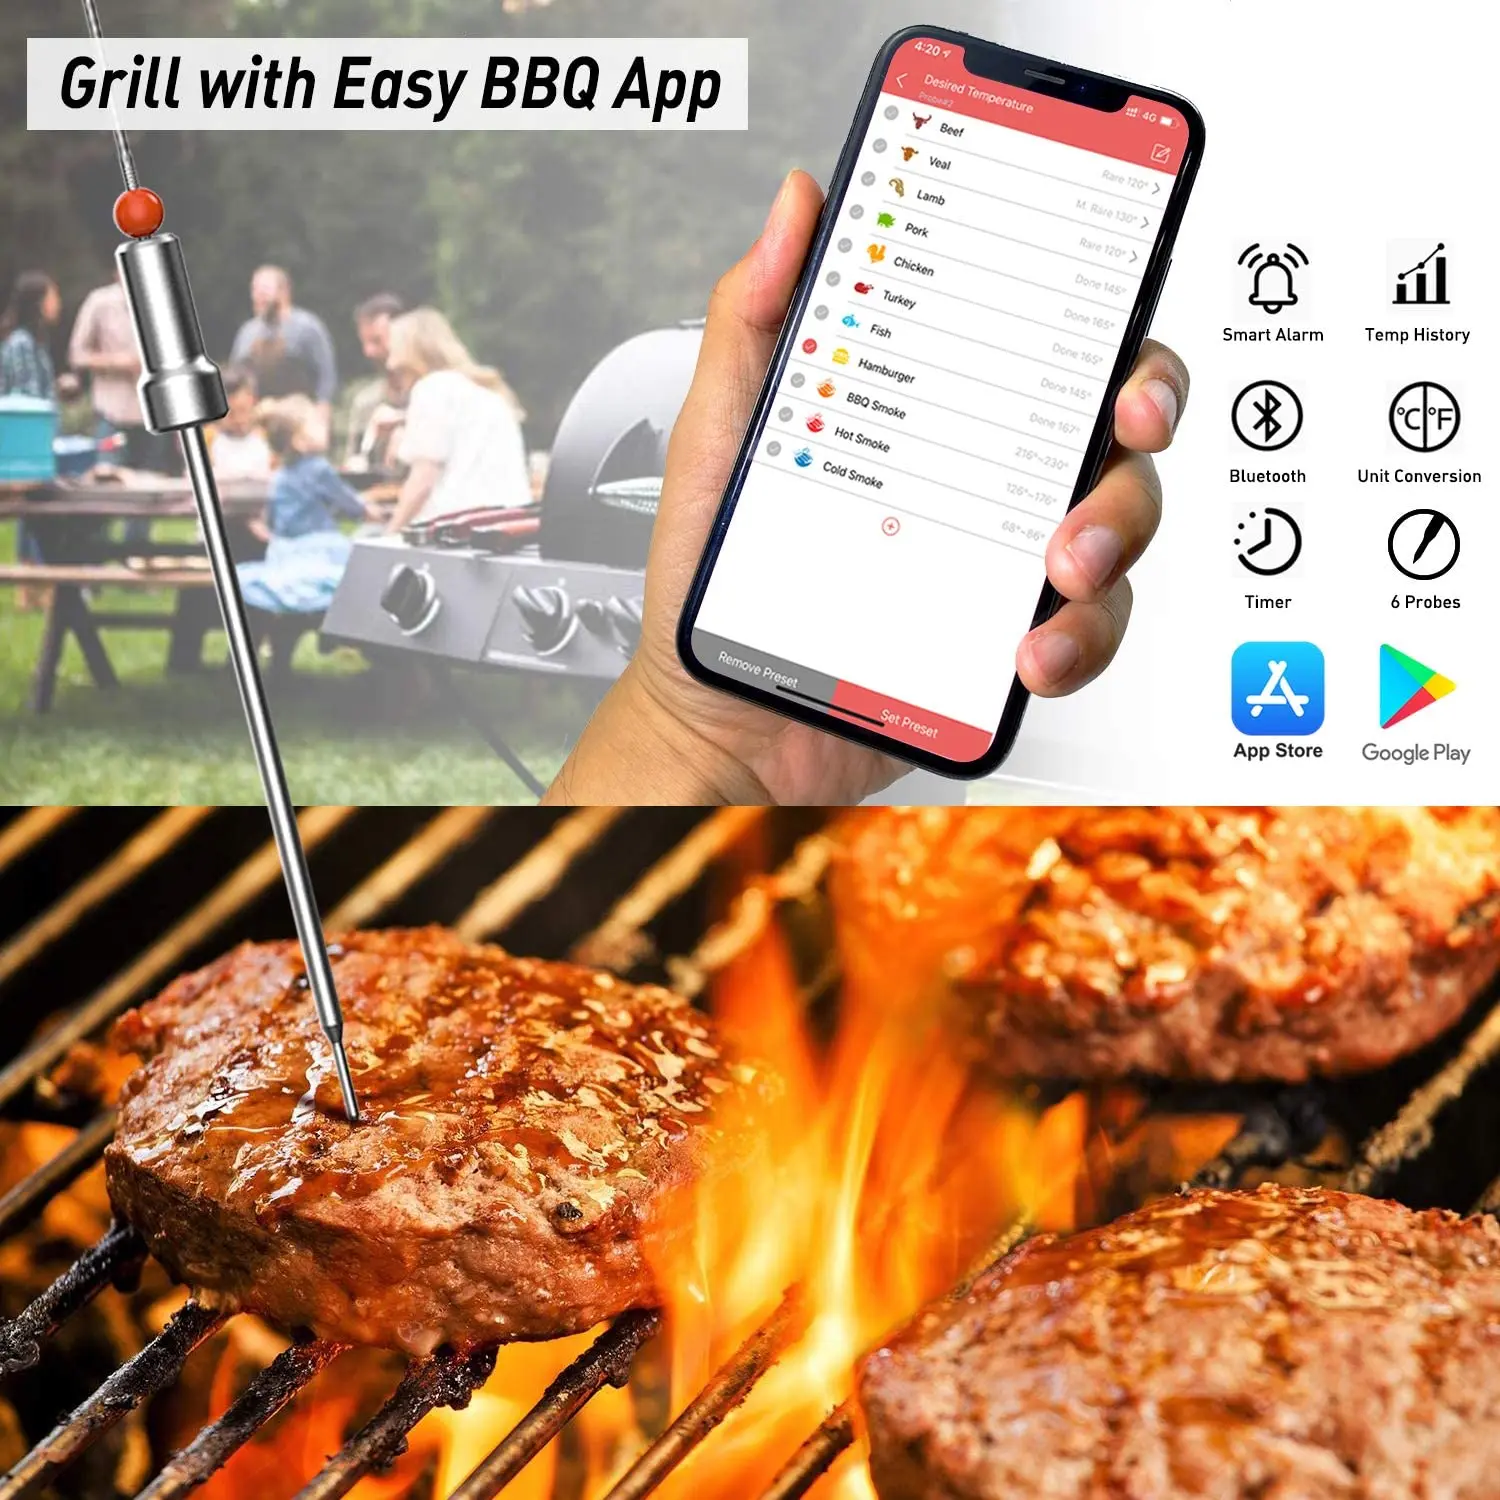 AidMax Pro02 Digital Wireless  Bluetooth Cooking Food Thermometer Smart BBQ for Kitchen Smoker Grill with Free App